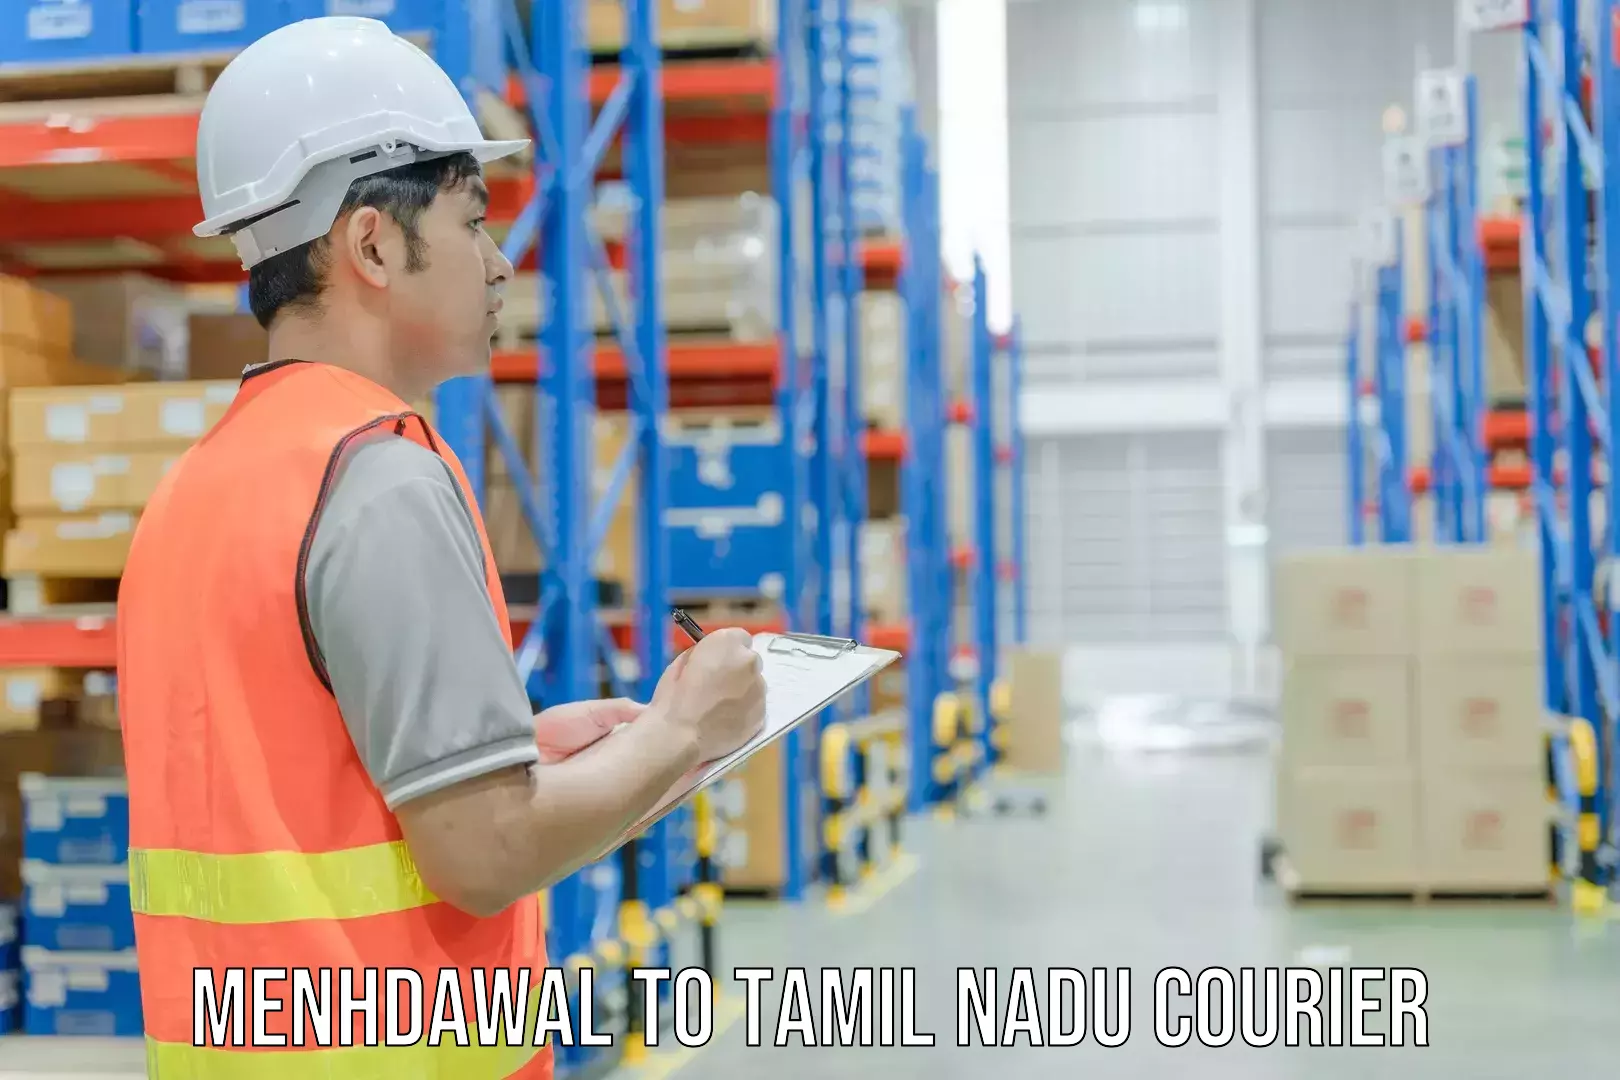 Professional courier handling Menhdawal to Tiruppur